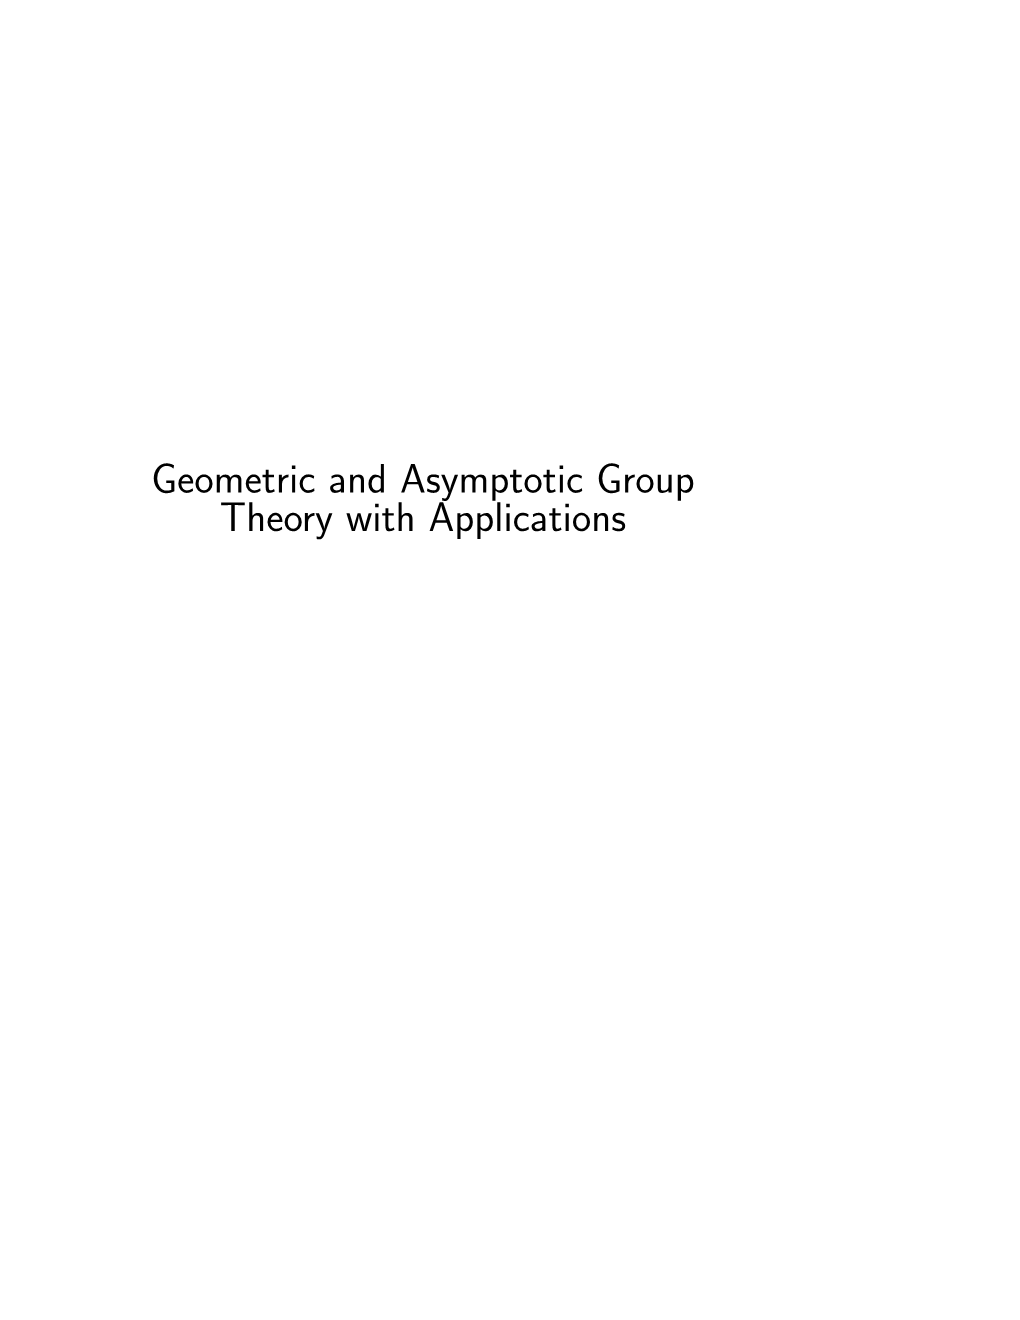 Geometric and Asymptotic Group Theory with Applications Geometric and Asymptotic Group Theory with Applications AMS Subject Classiﬁcation: 20-XX A